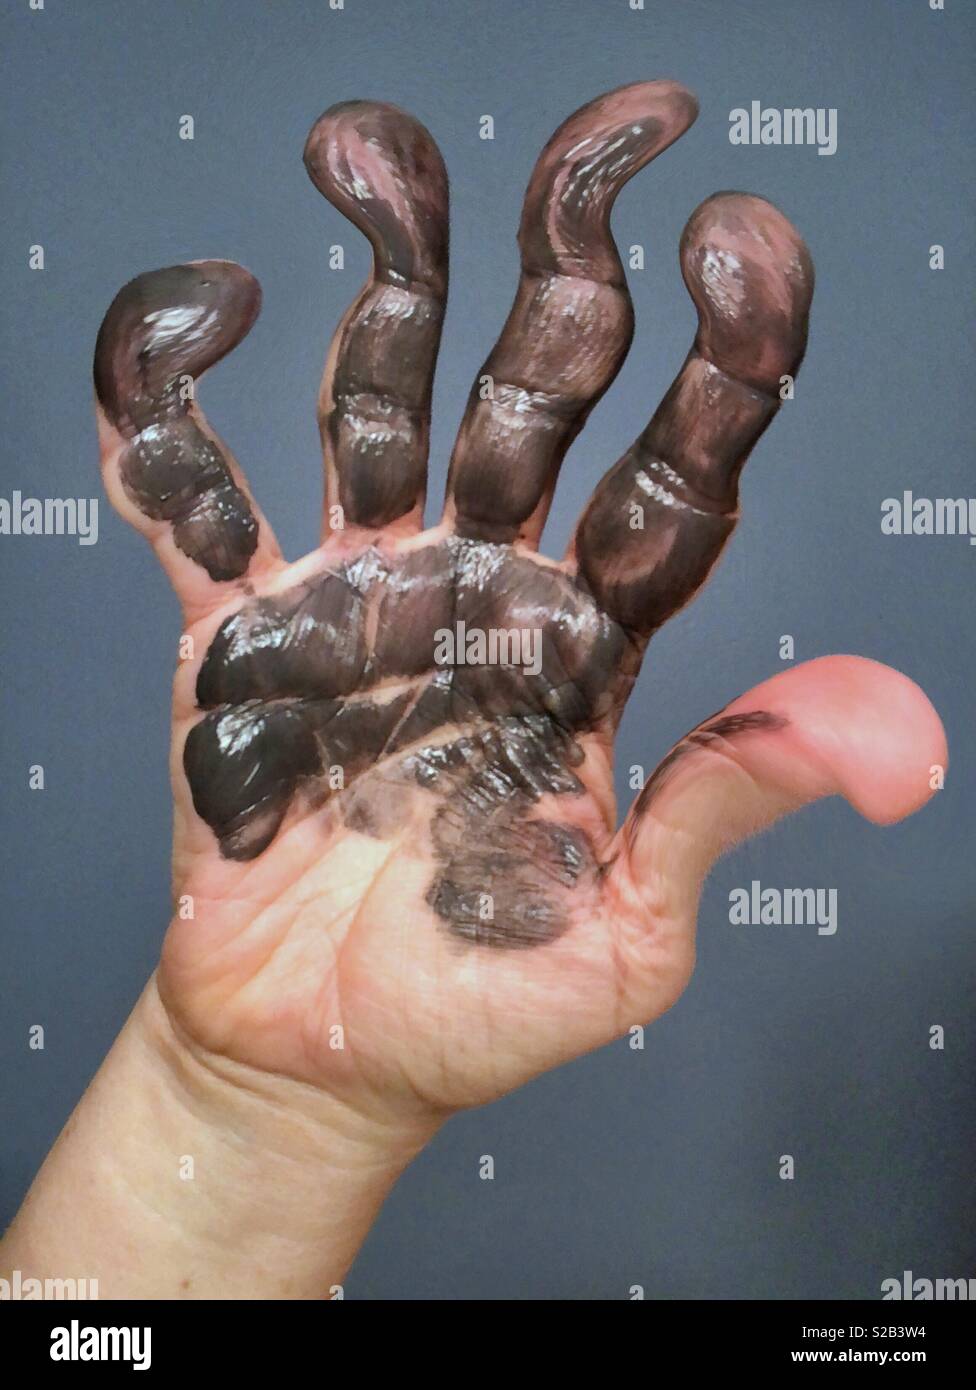 An abstract digital manipulation showing a hand covered in grey paint with distorted fingers Stock Photo